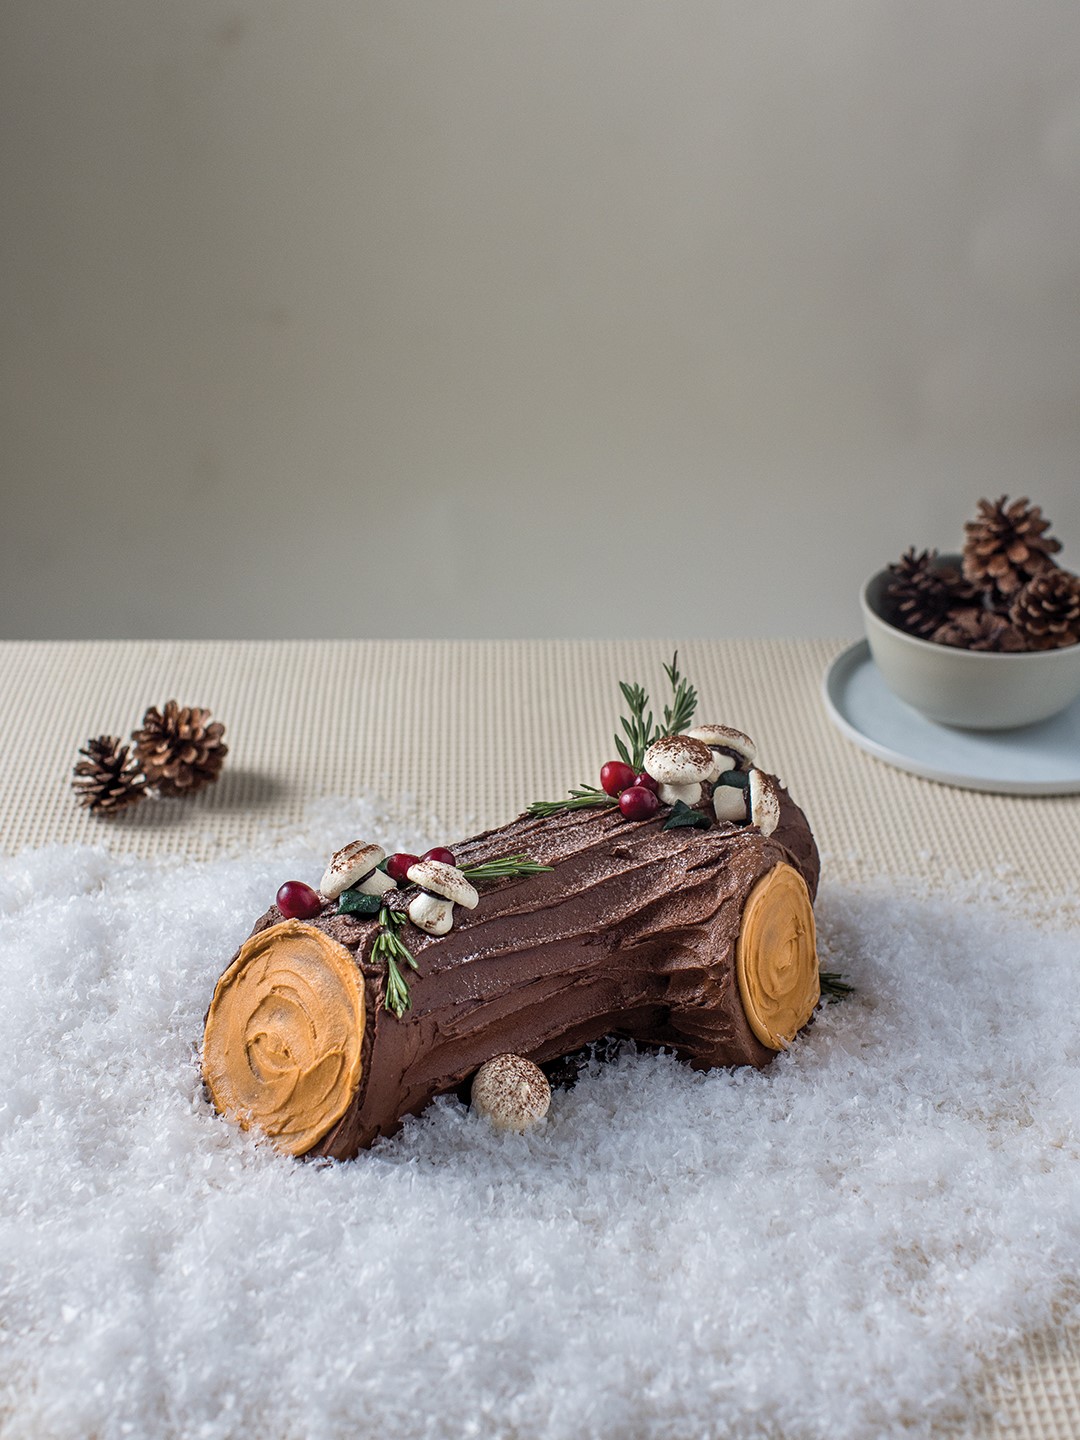 Queen of Cakes Yule Log Cake in traditional chocolate.